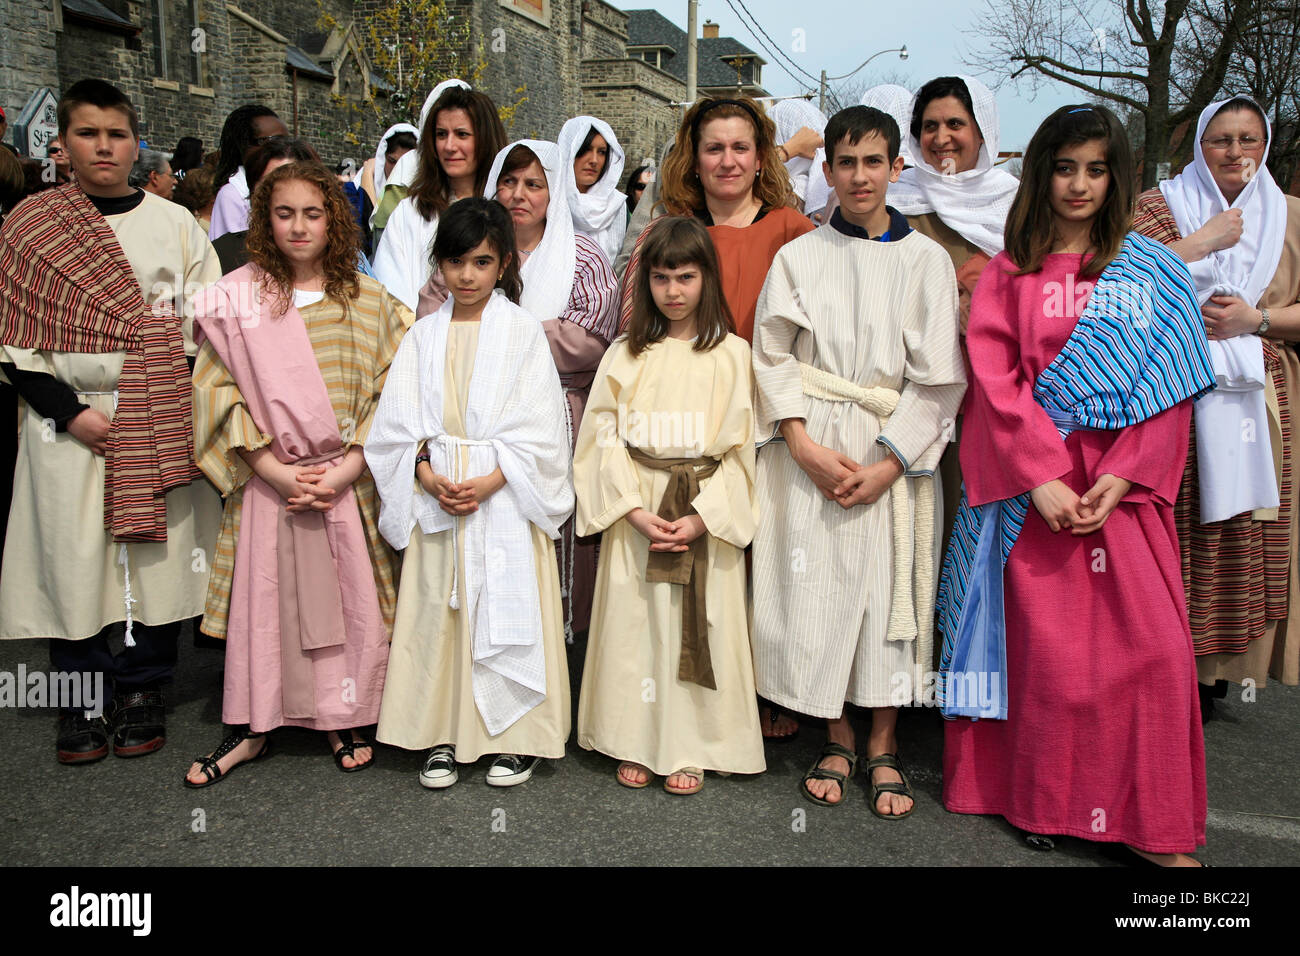 Children in costumes at Holy Easter or Good Friday Procession Parade,' Little Italy', Toronto,Ontario,Canada,North America Stock Photo